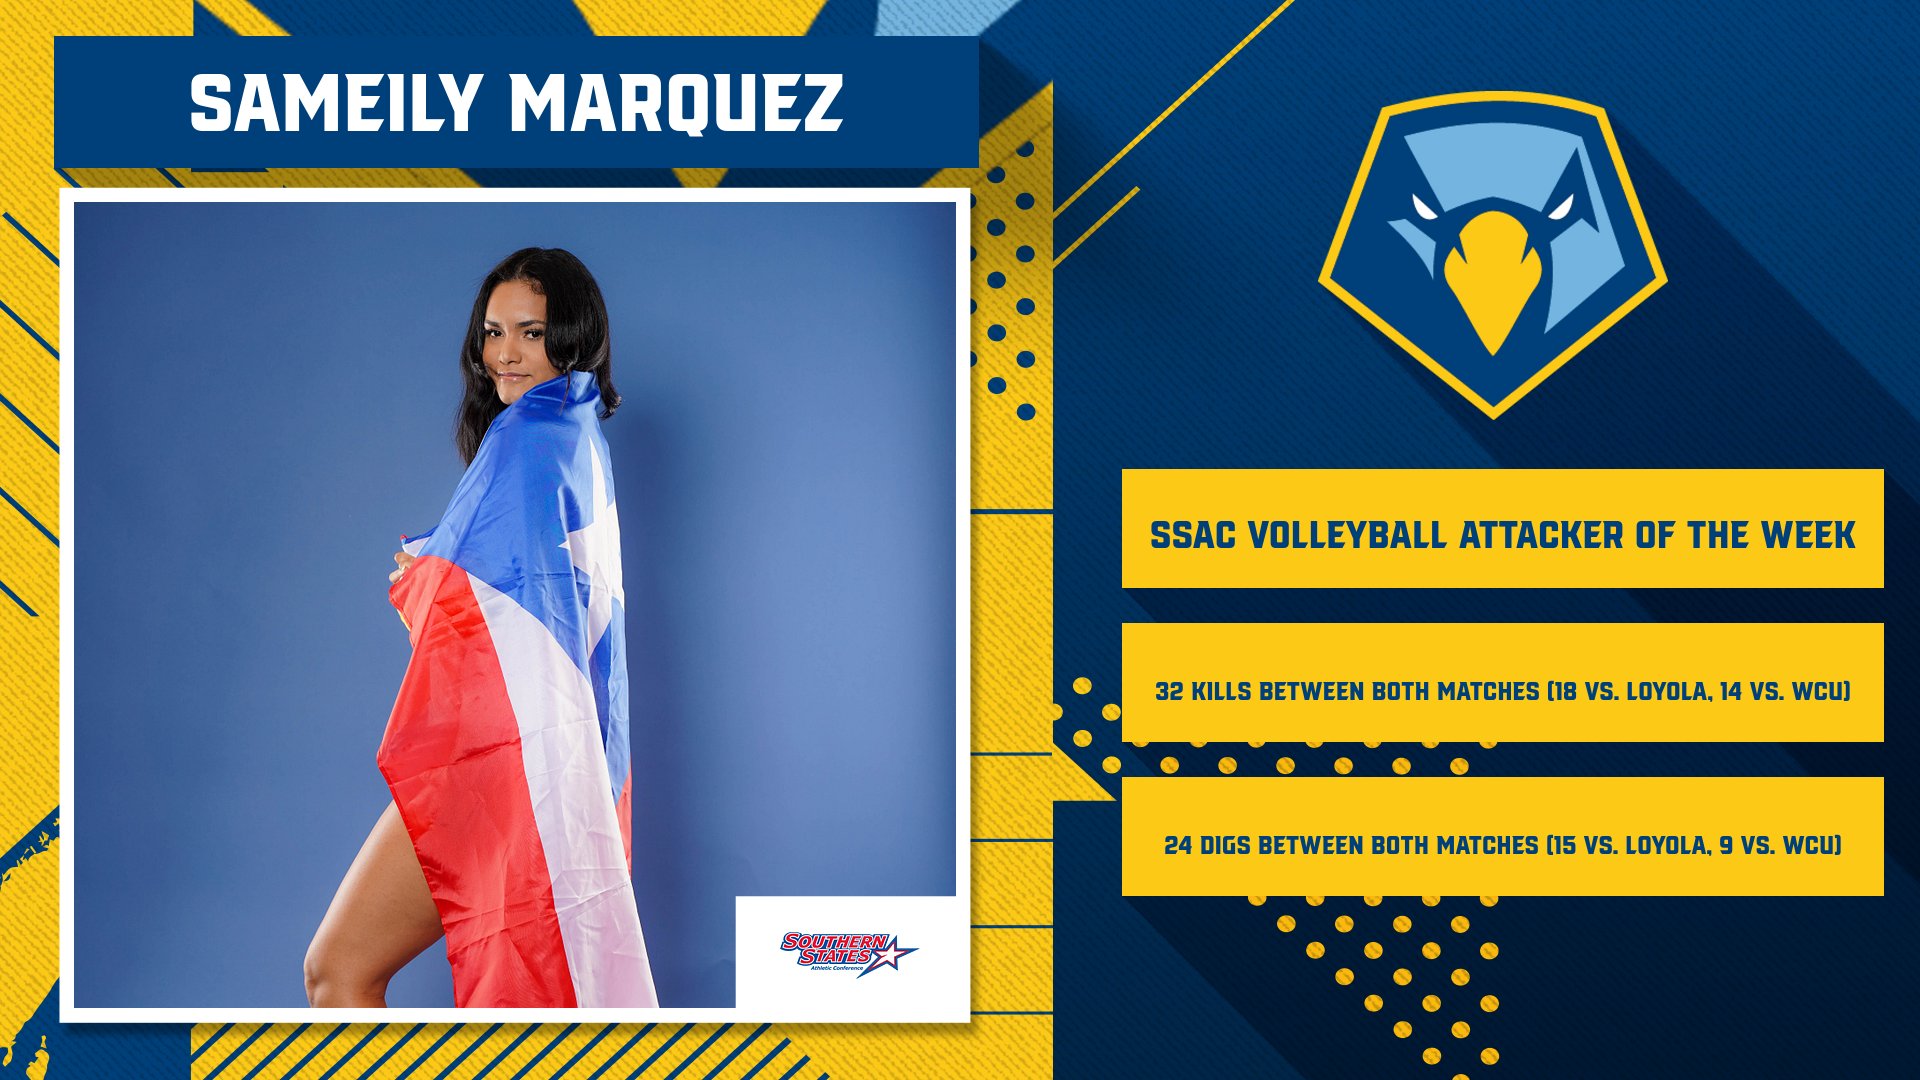 Sameily Marquez earns SSAC Volleyball Attacker of the Week